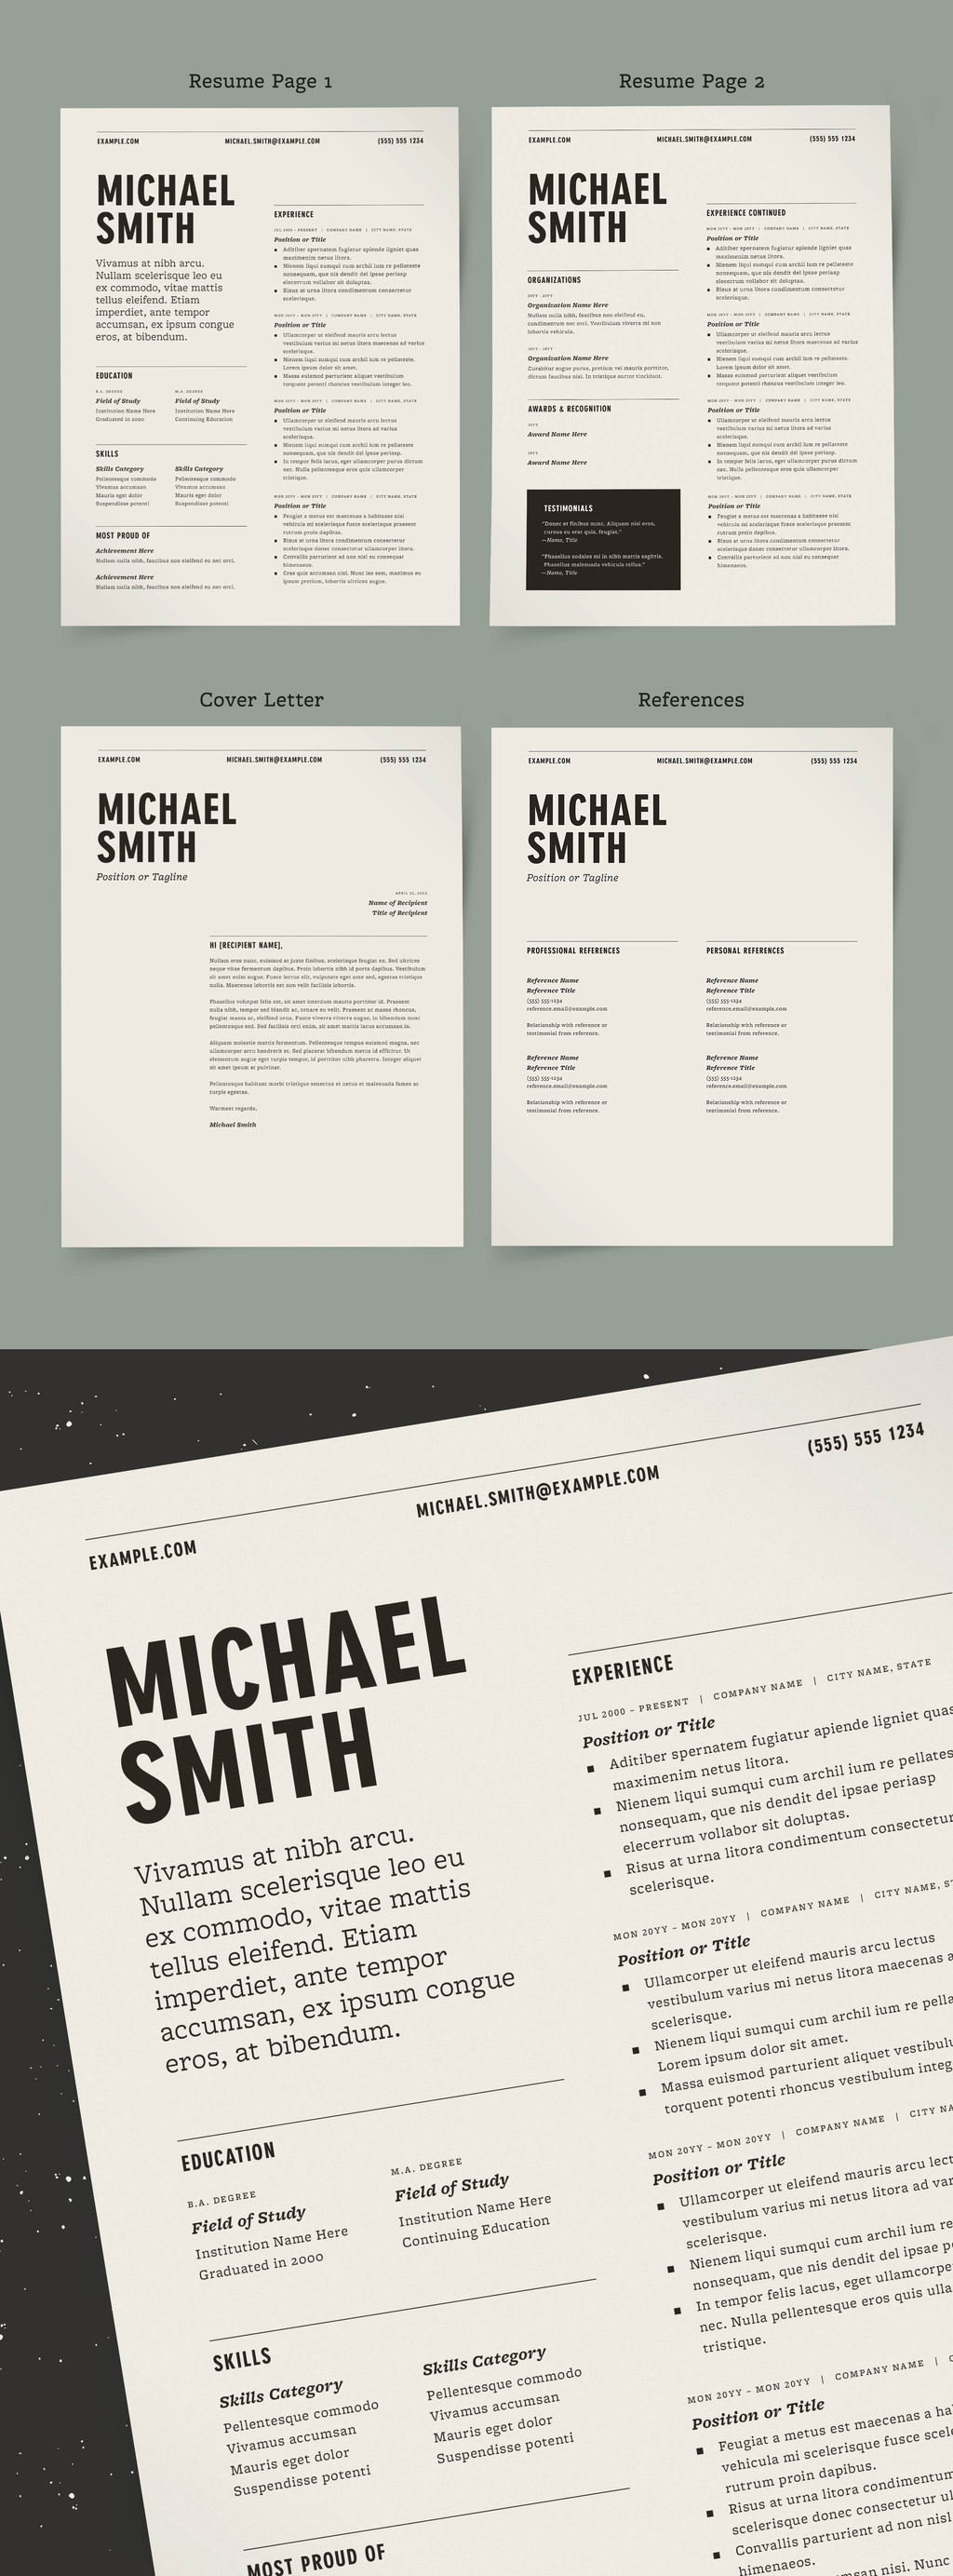 Two-column resume template kit from @More Profesh.